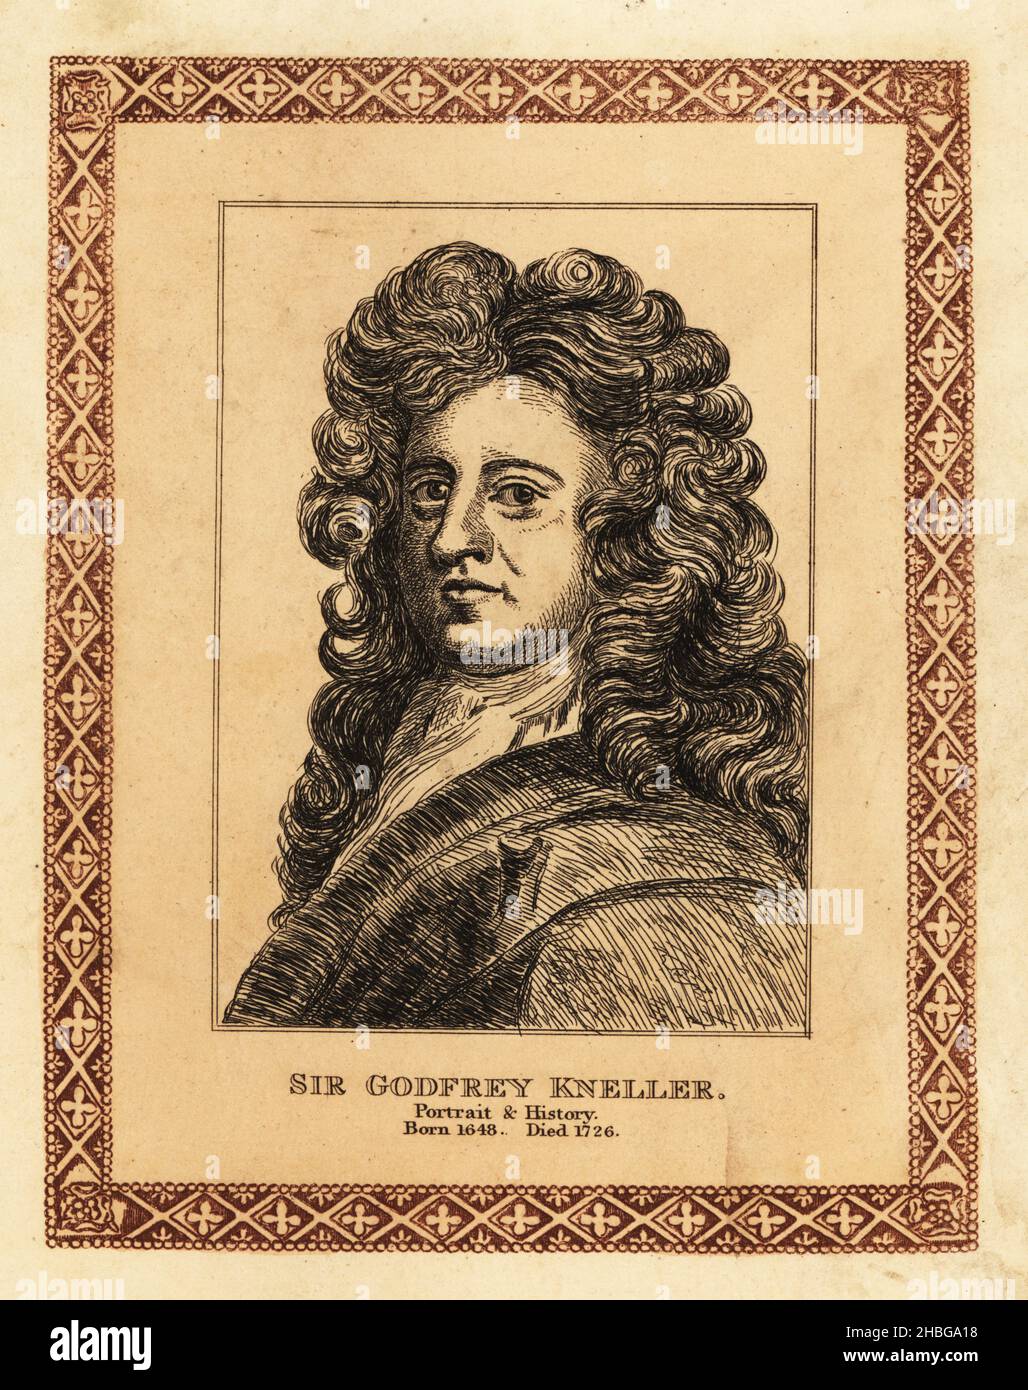 Self-portrait of Sir Godfrey Kneller, 1st Baronet, 1646-1723, portrait painter in England during the late 17th and early 18th centuries, court painter to British monarchs from King Charles II to King George I. Tinted etching within a decorative border by John Girtin after a self-portrait by Kneller from John Girtin’s Seventy-Five Portraits of Celebrated Painters from Authentic Originals, J. M’Creery, London, 1817. Stock Photo